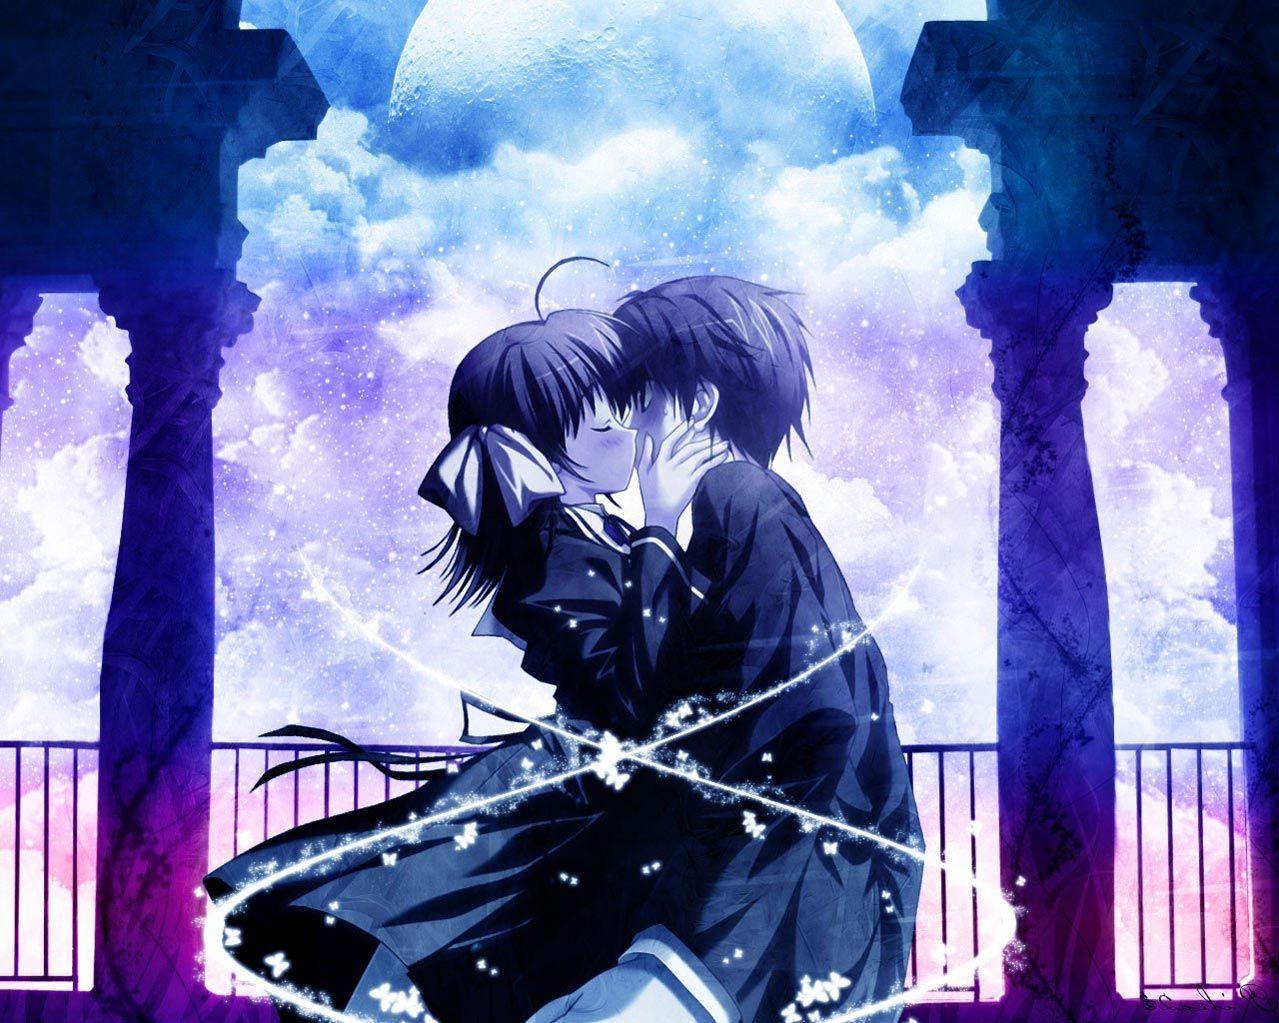 Anime Love Kiss Wallpapers - Wallpaper Cave